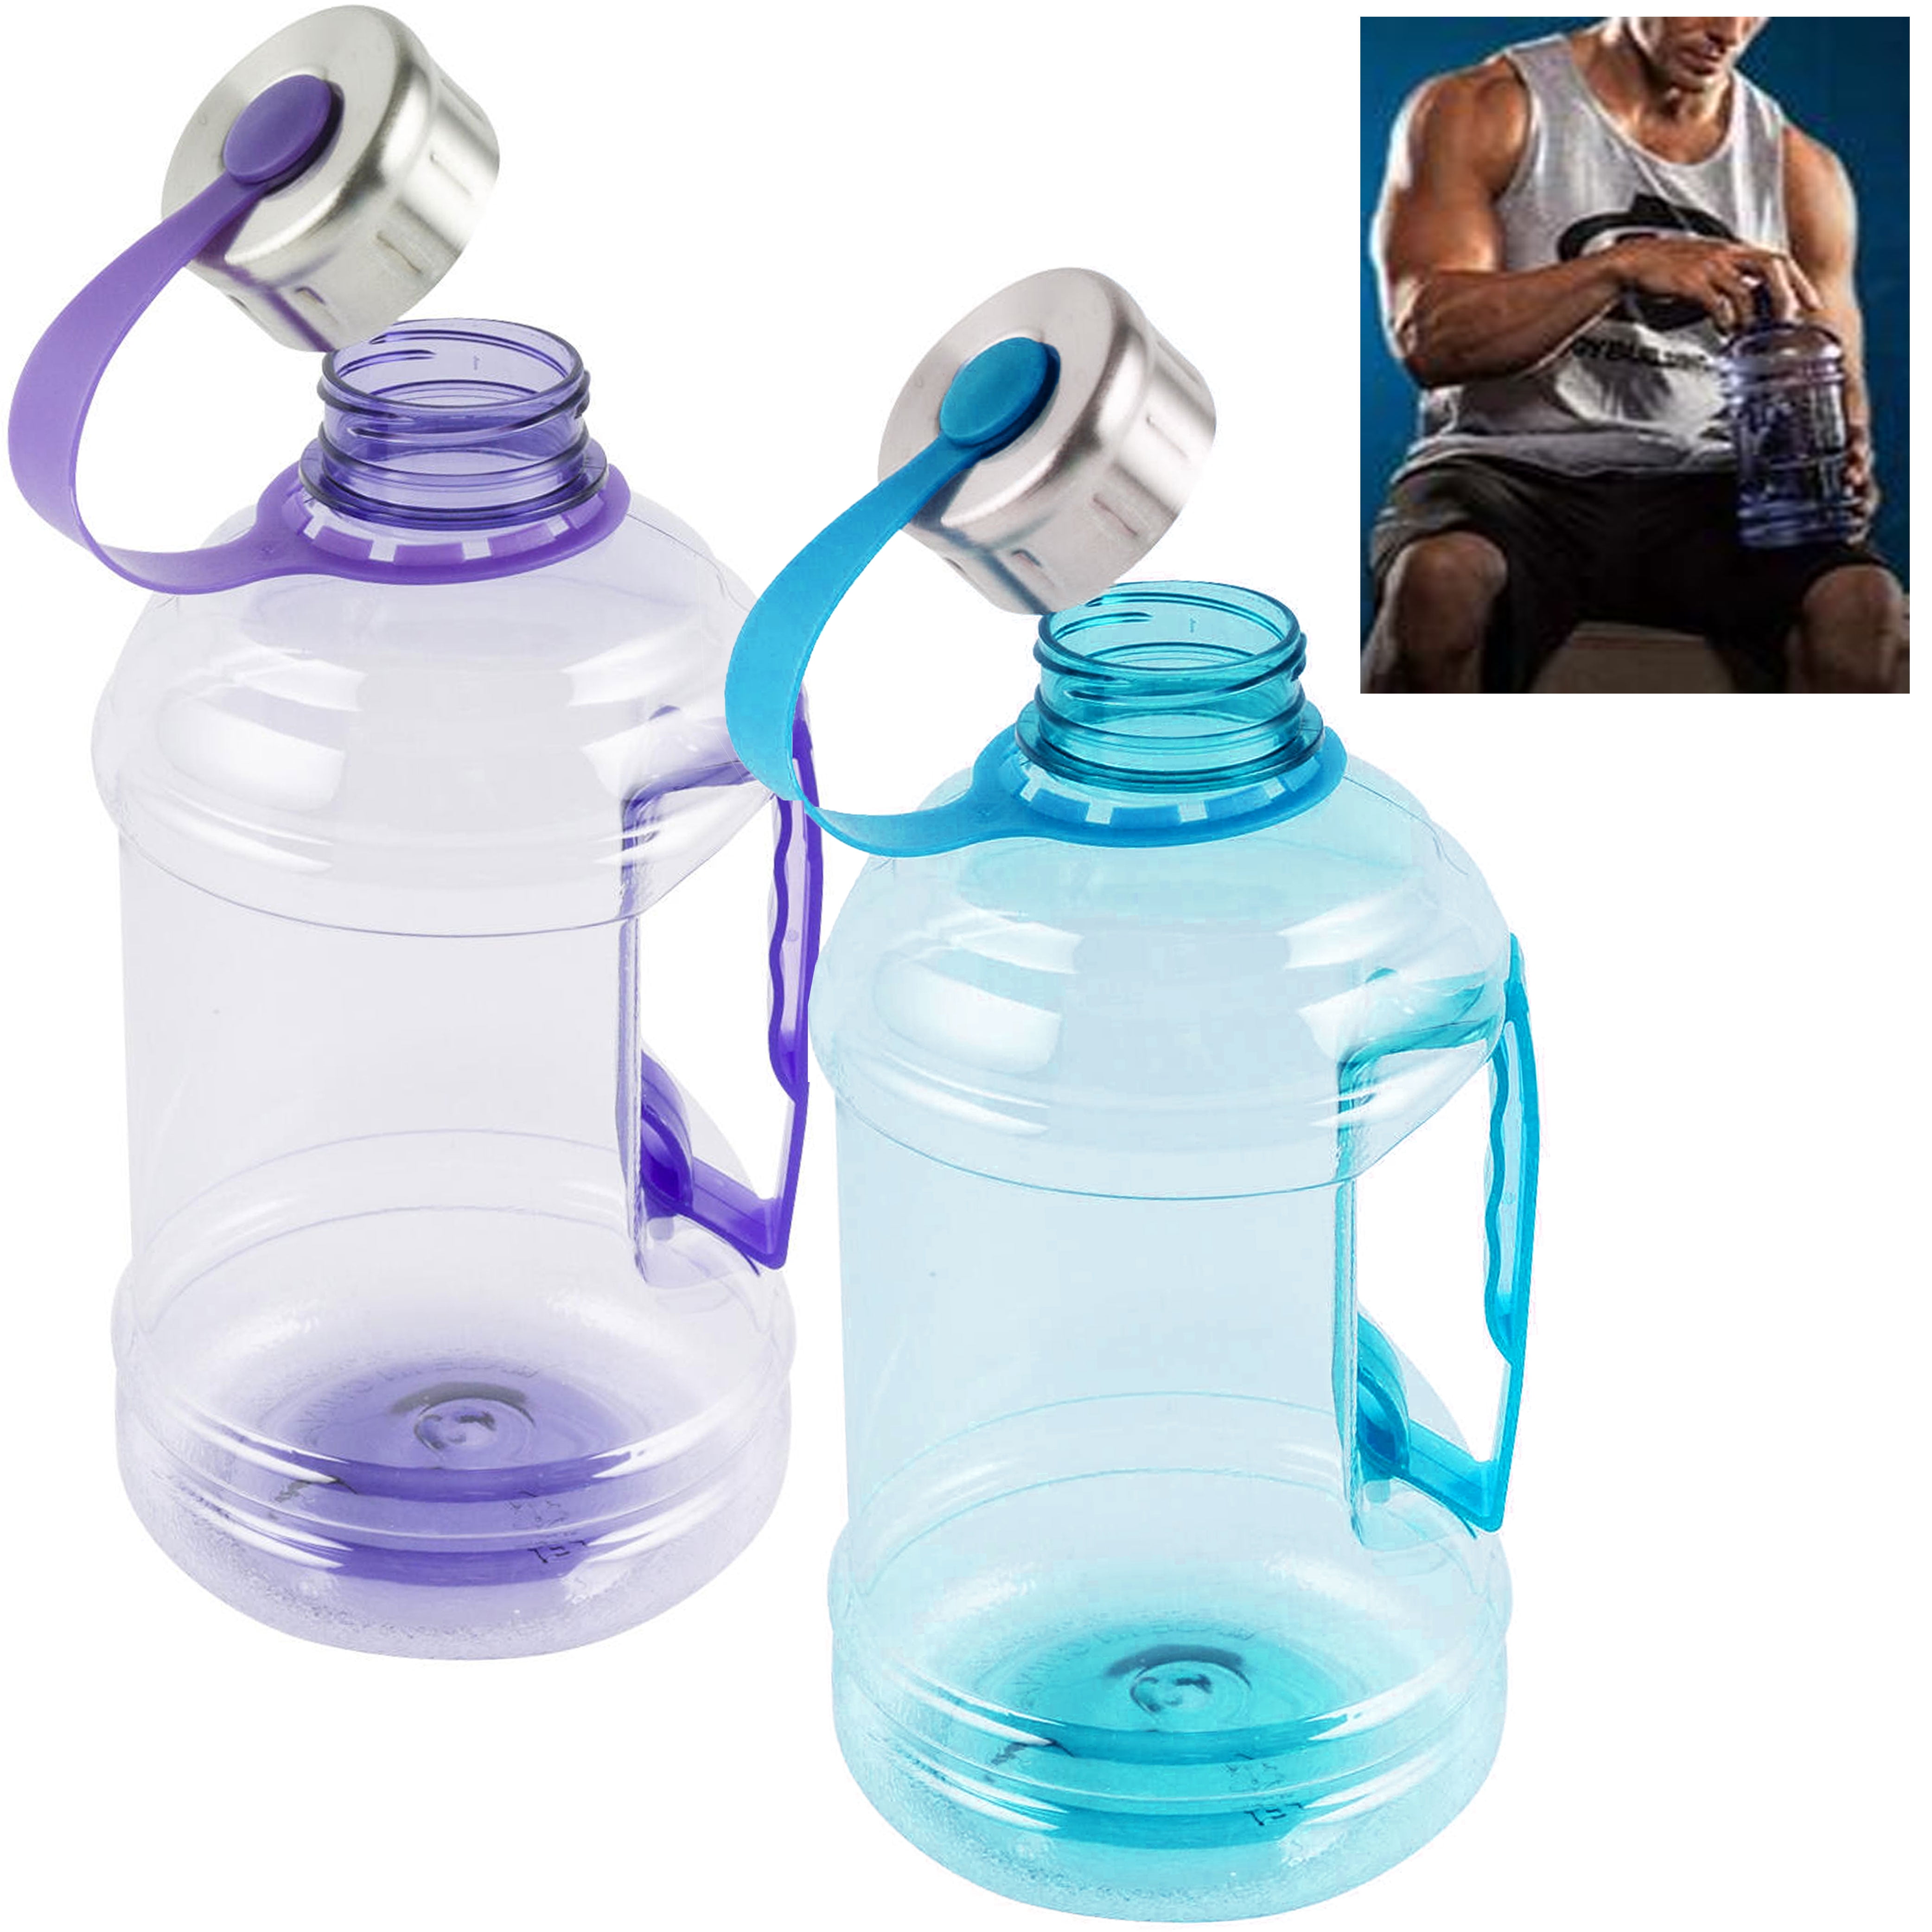 Portable 1000ml Outdoor Water Bottle With Straw With Straw For Hiking,  Camping, And Sports BPA Free, Colorful Plastic Drink Bottle B0601X06 From  Bestoffers, $6.41